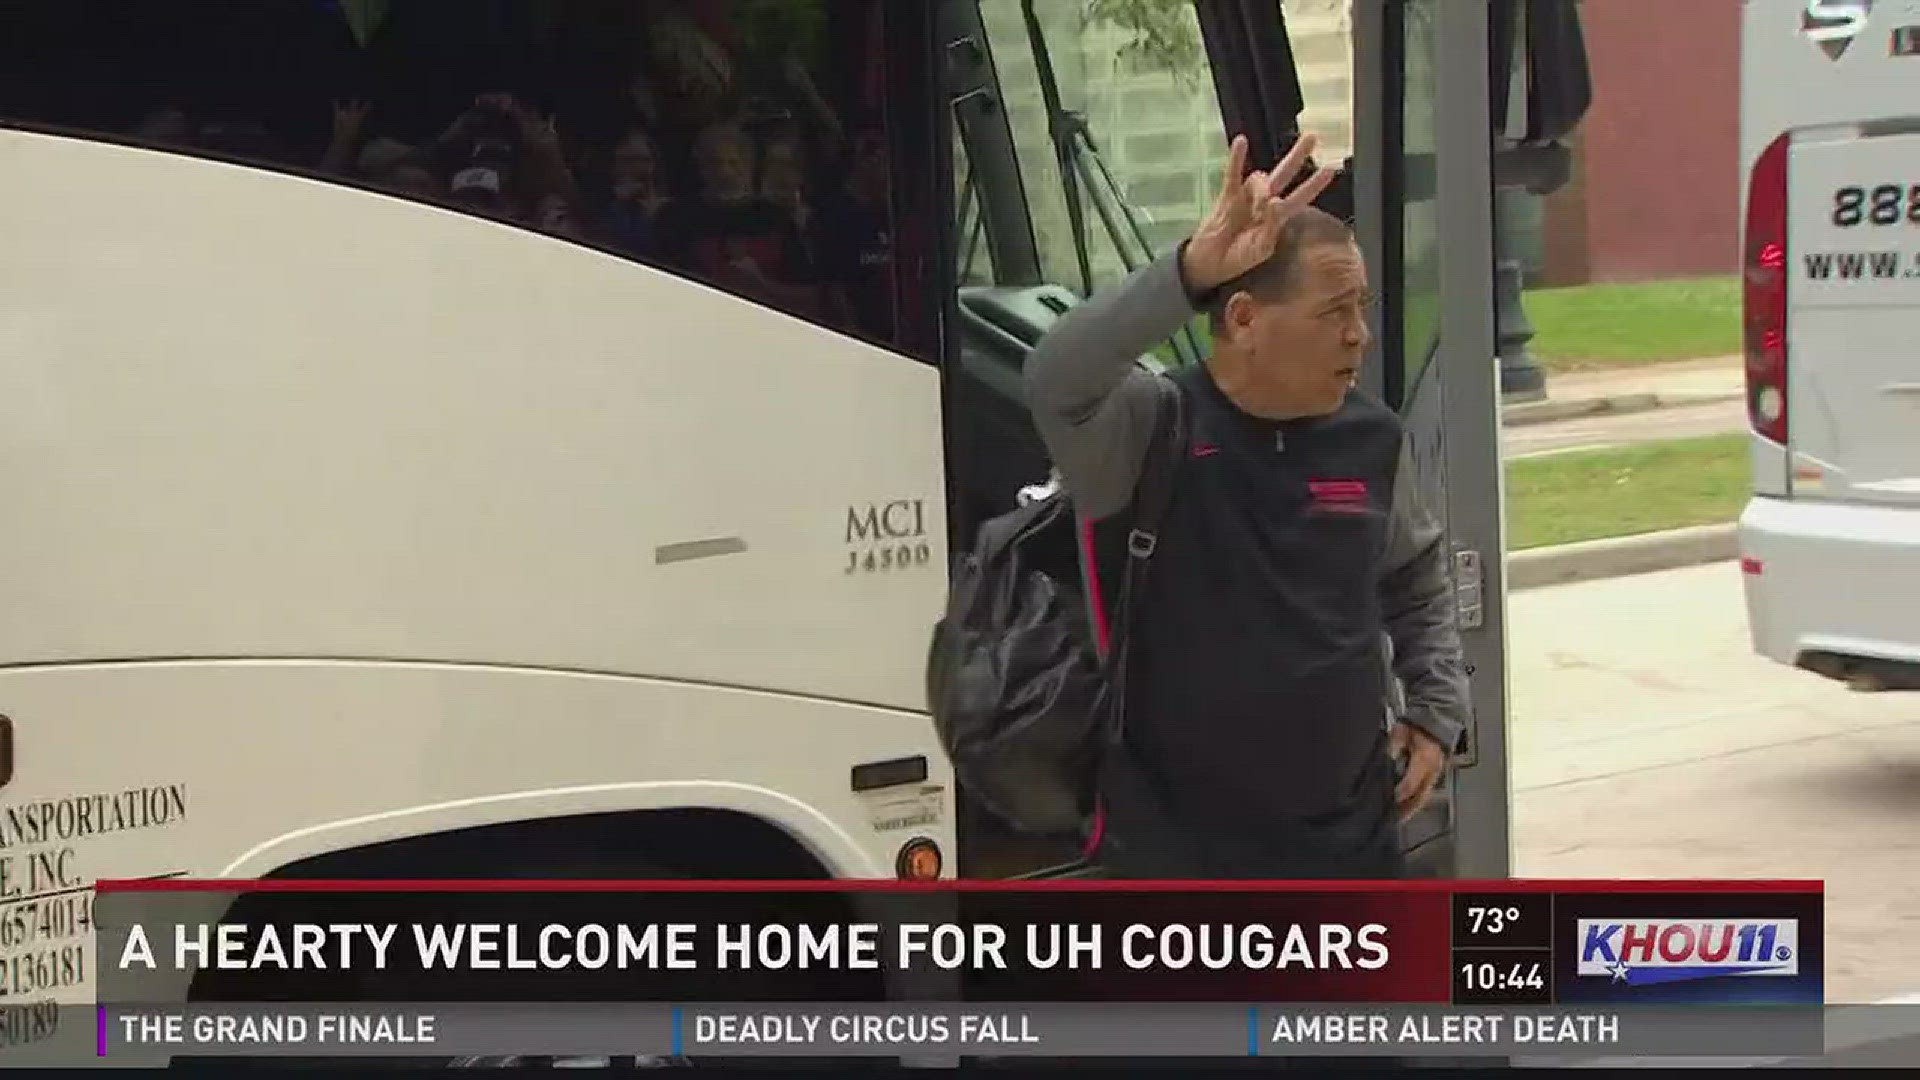 The University of Houston men's basketball team returned to campus on Sunday less than 24 hours after they lost to Michigan 64-63 in the second round of the NCAA tournament and fans were there to welcome the them home.